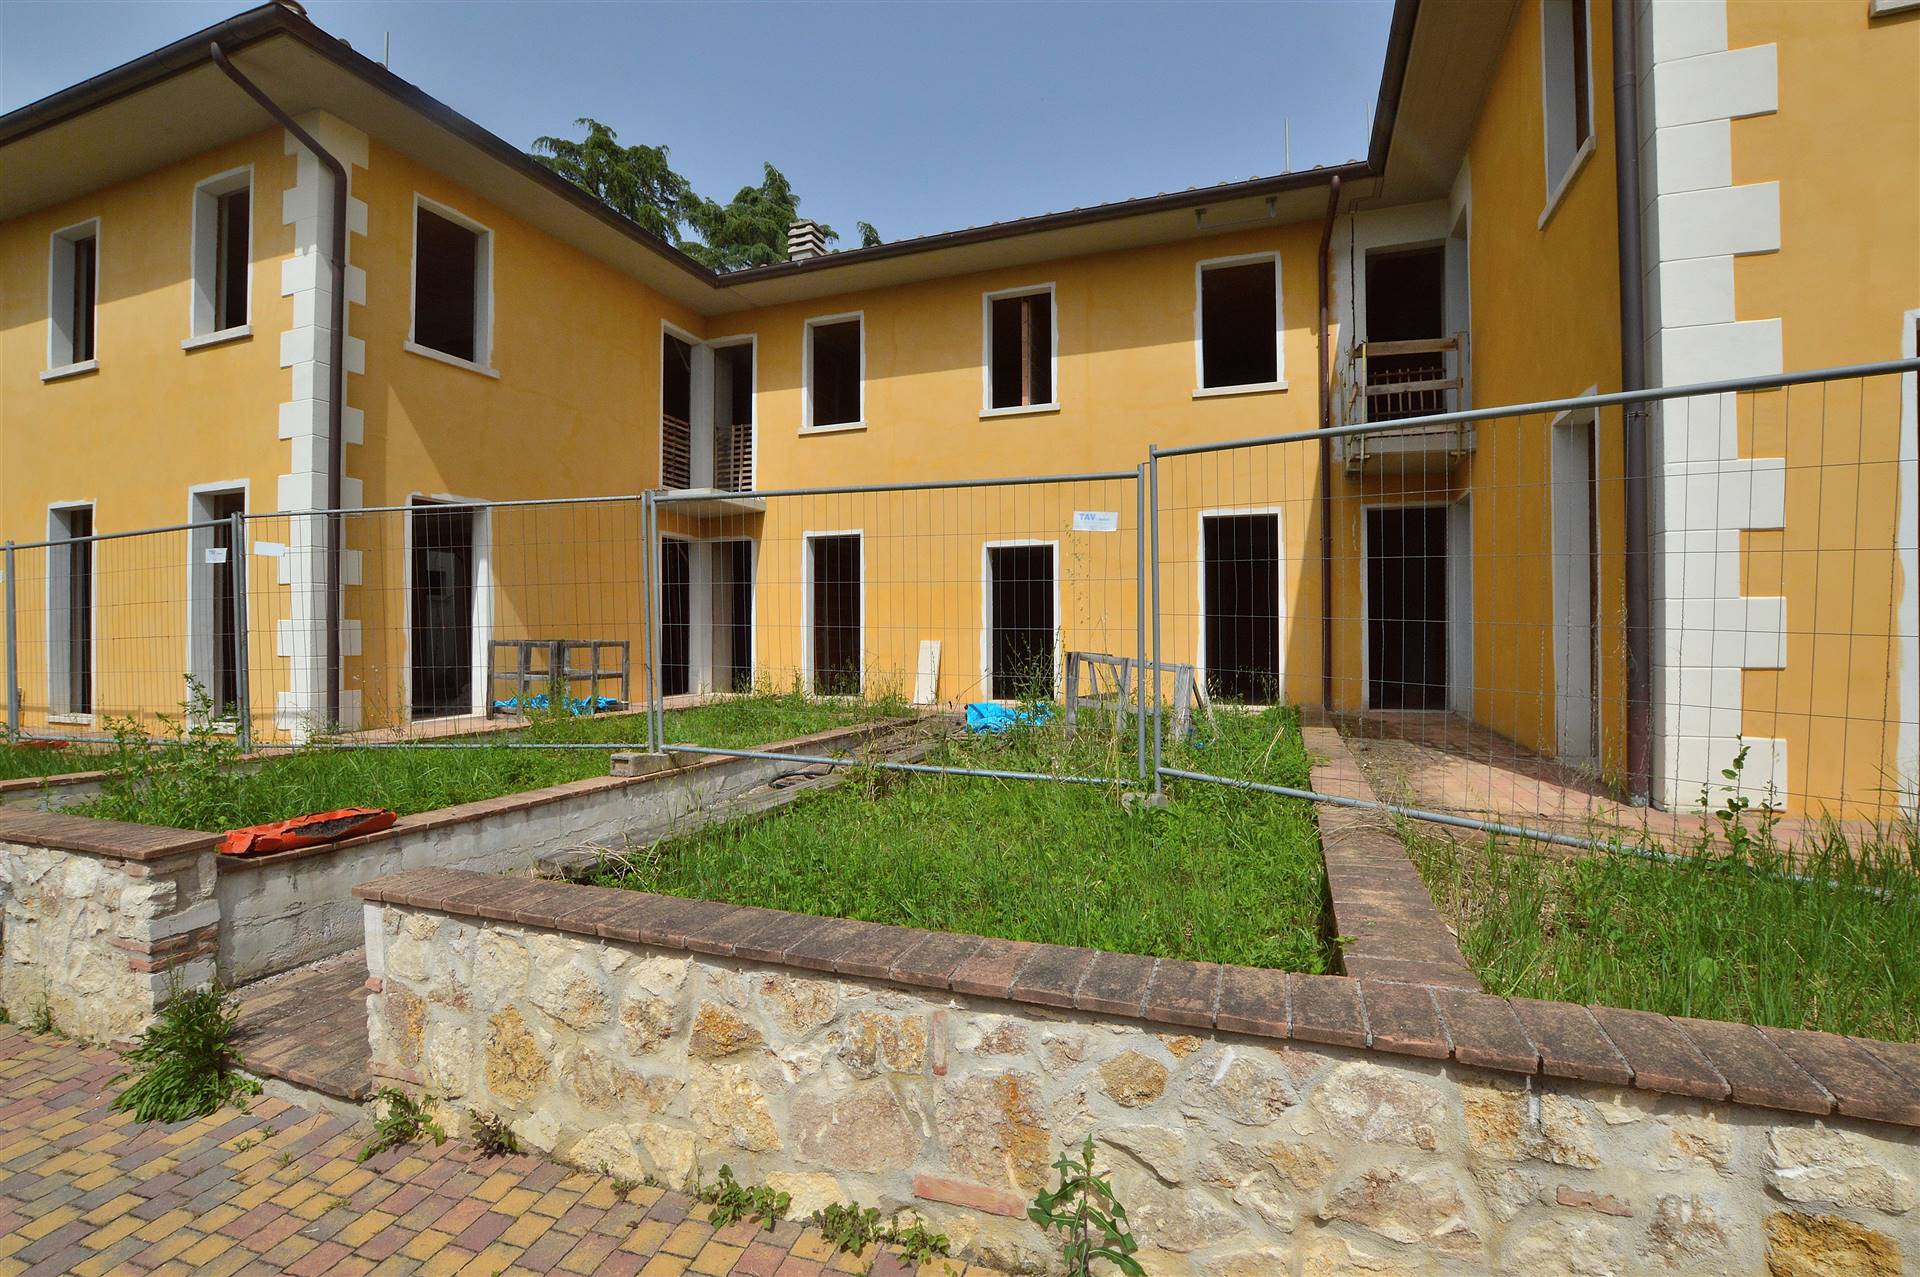 RAPOLANO TERME, Apartment for sale of 85 Sq. mt., New construction, Heating Individual heating system, Energetic class: A, composed by: 4 Rooms, , 3 